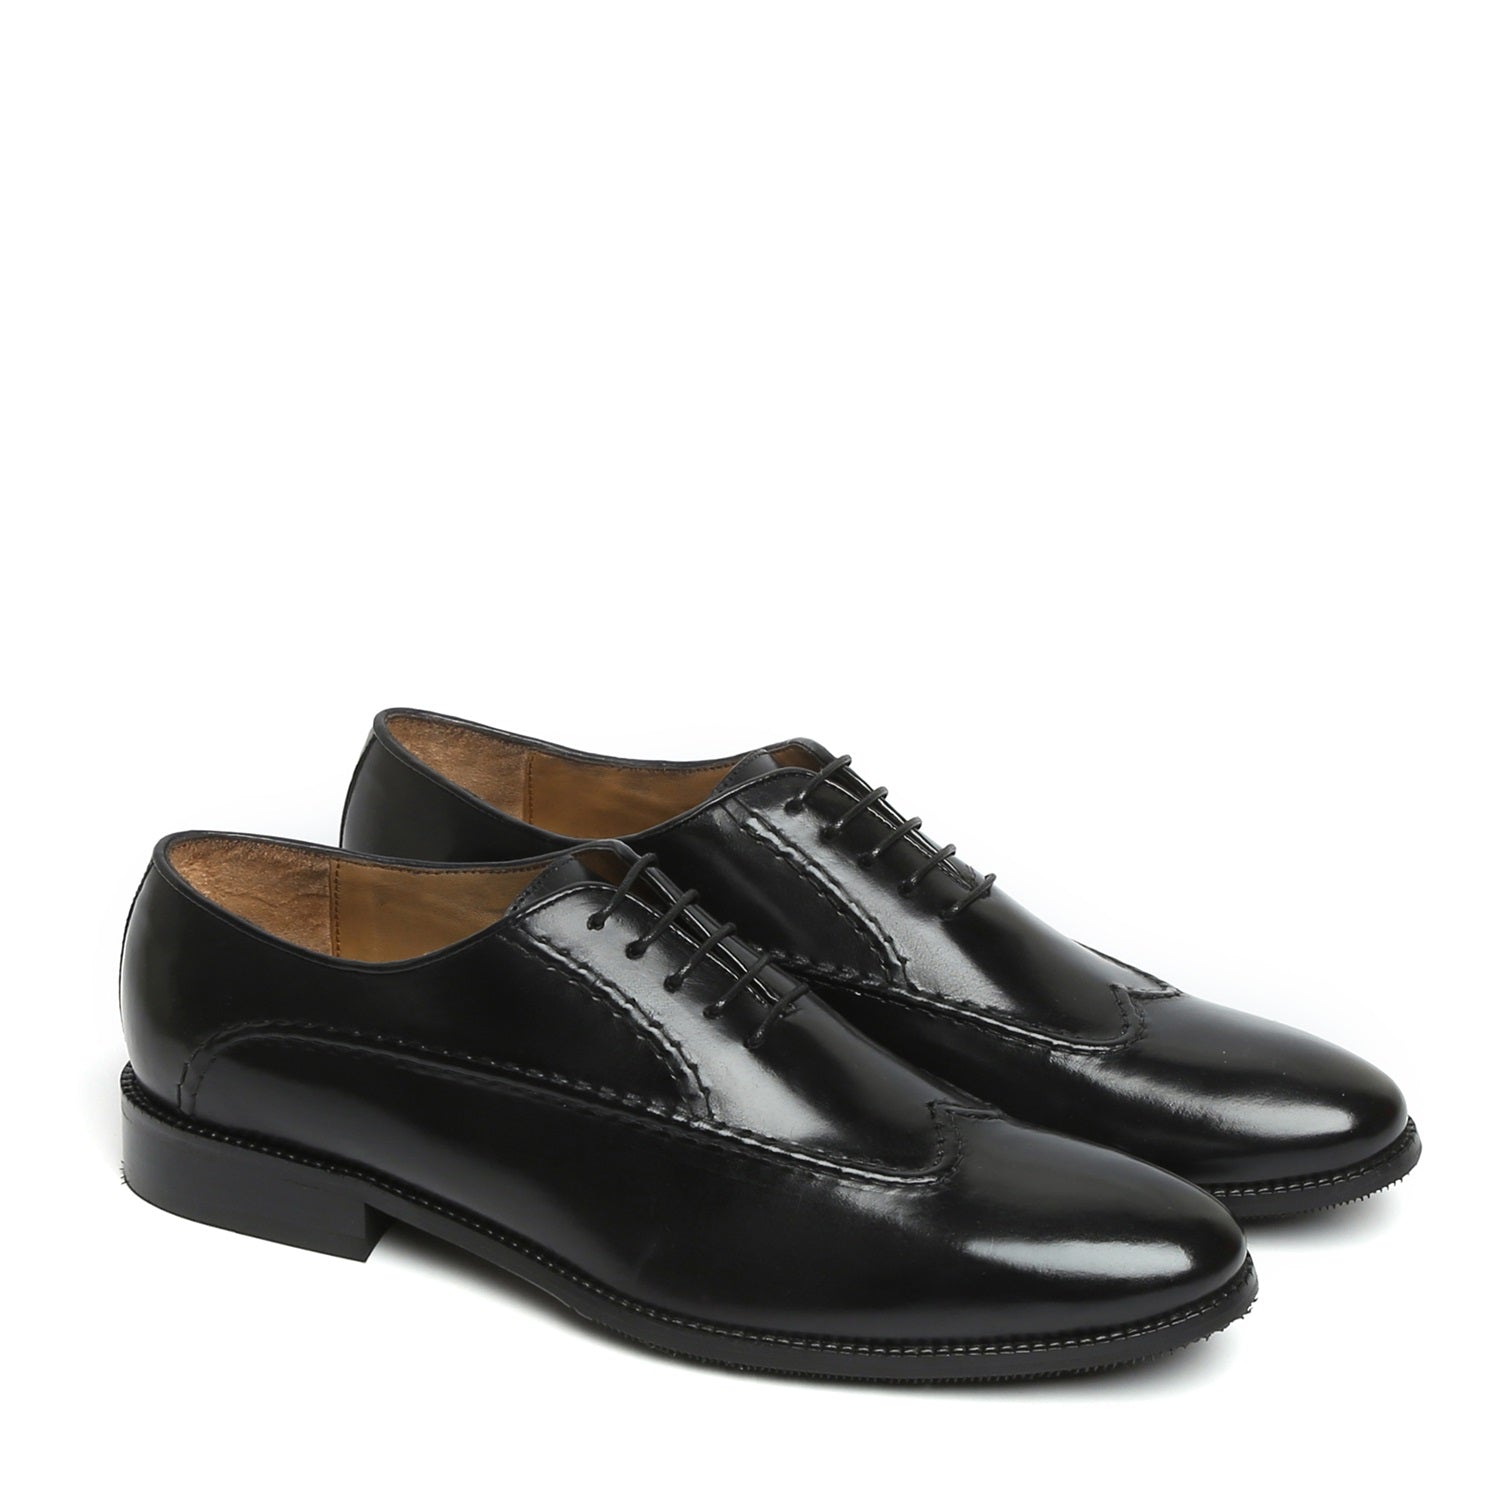 Long Stitched Lines Design Black Leather Oxford Lace-Up Shoe